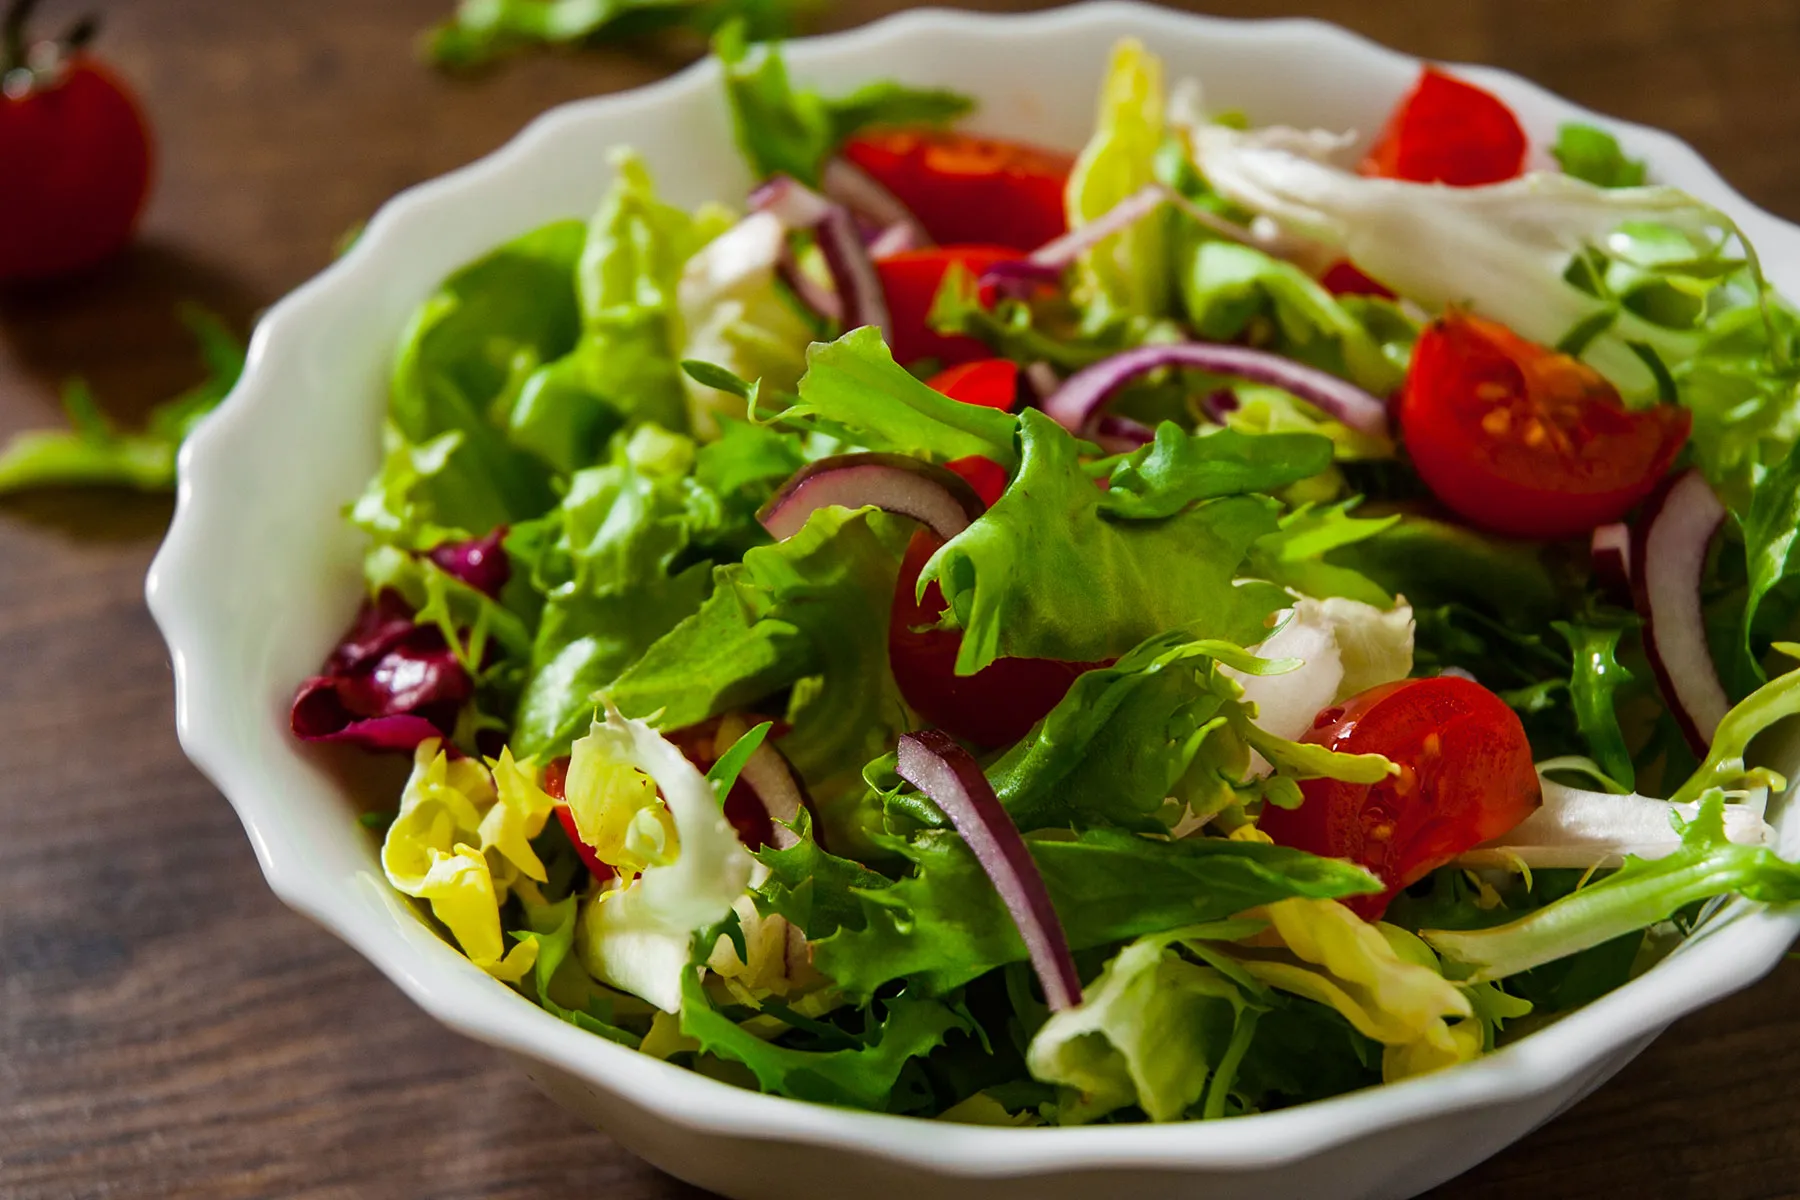 2 Dead From Listeria Outbreak Linked to Dole Packaged Salads